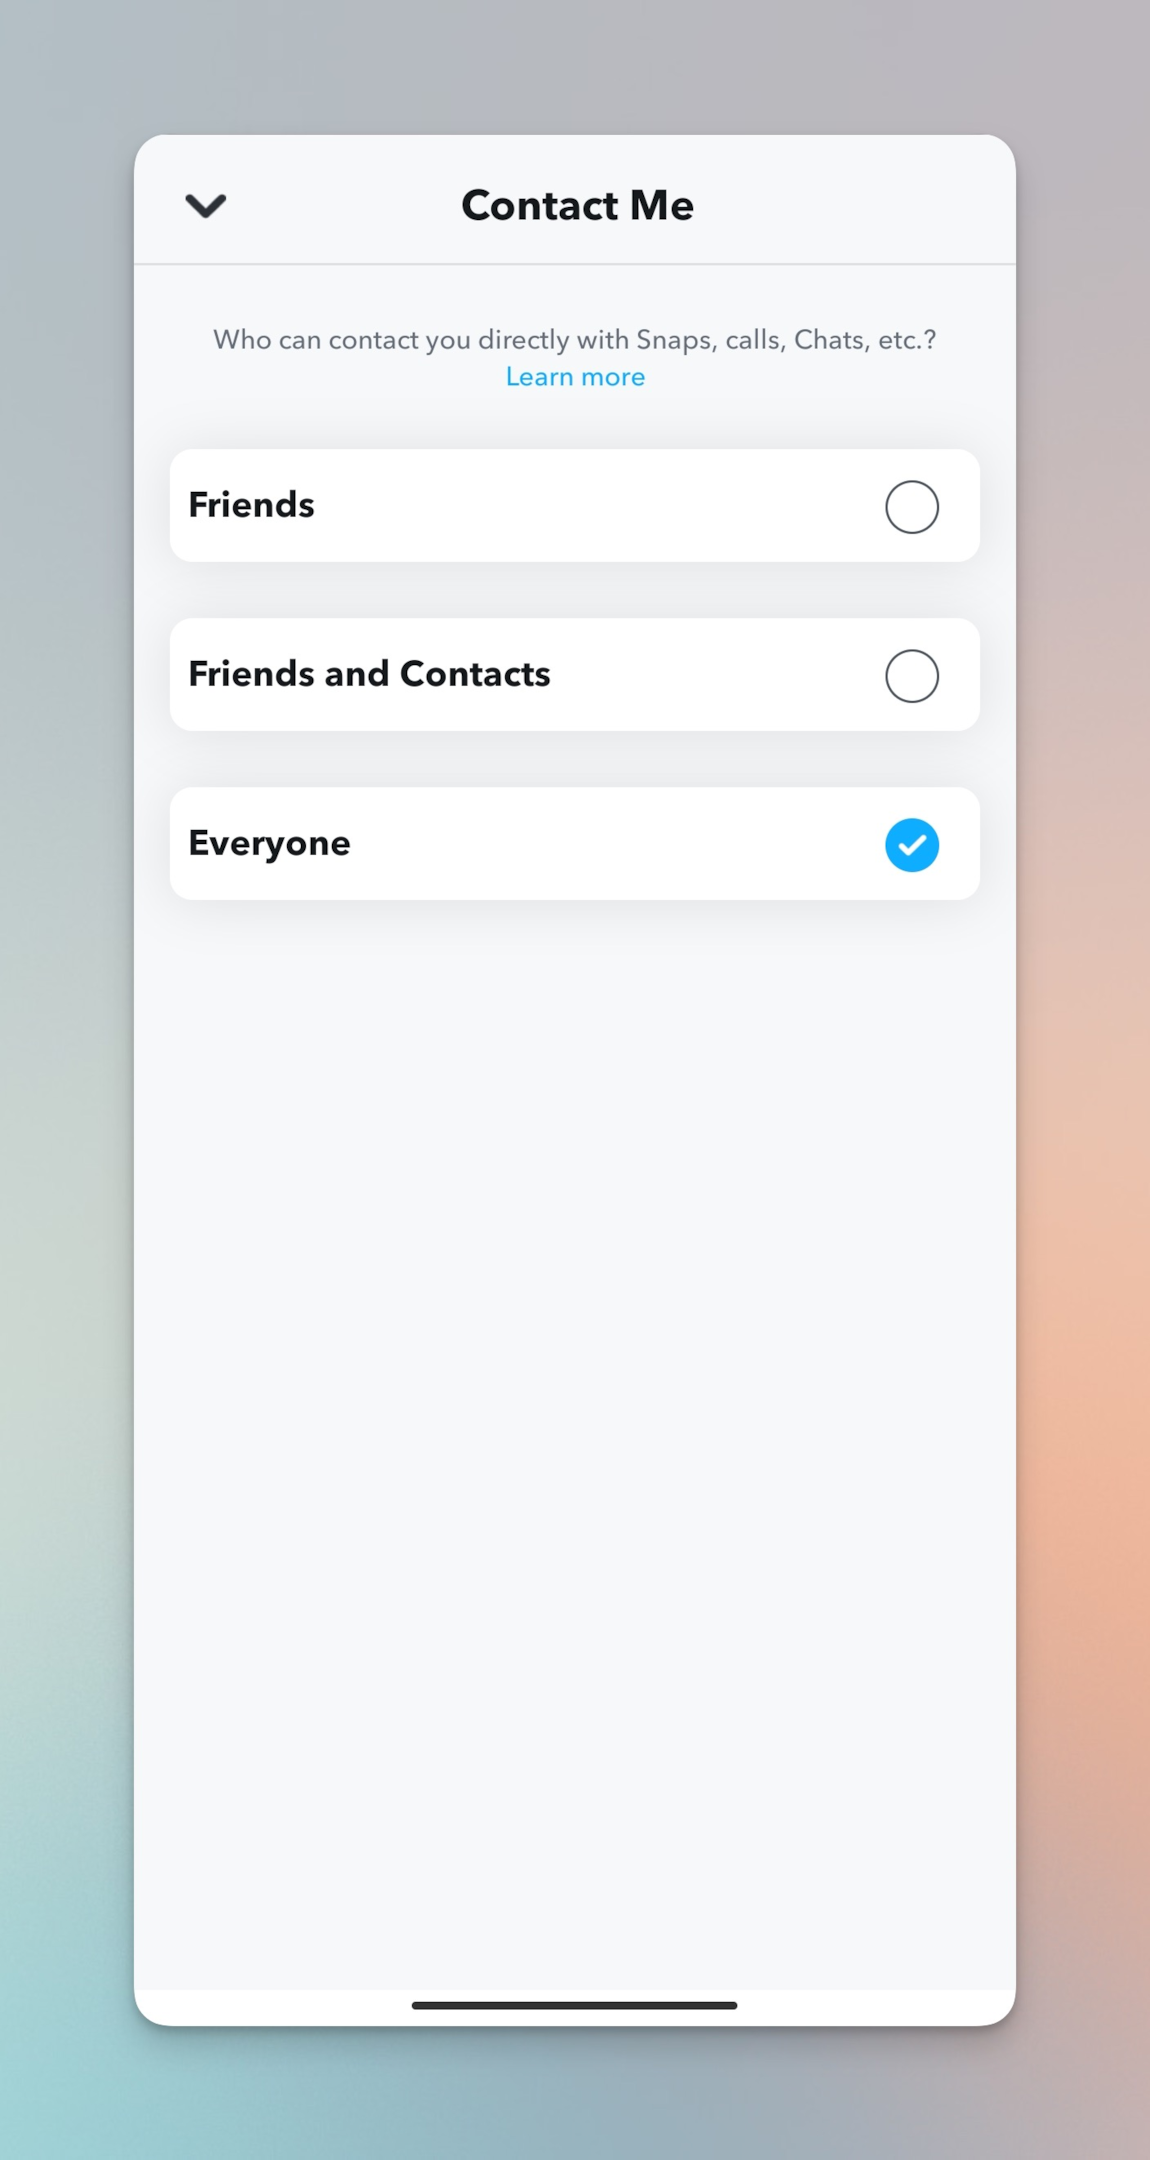 Remote.tools shows three options you can choose from for Contact Me setting on Snapchat